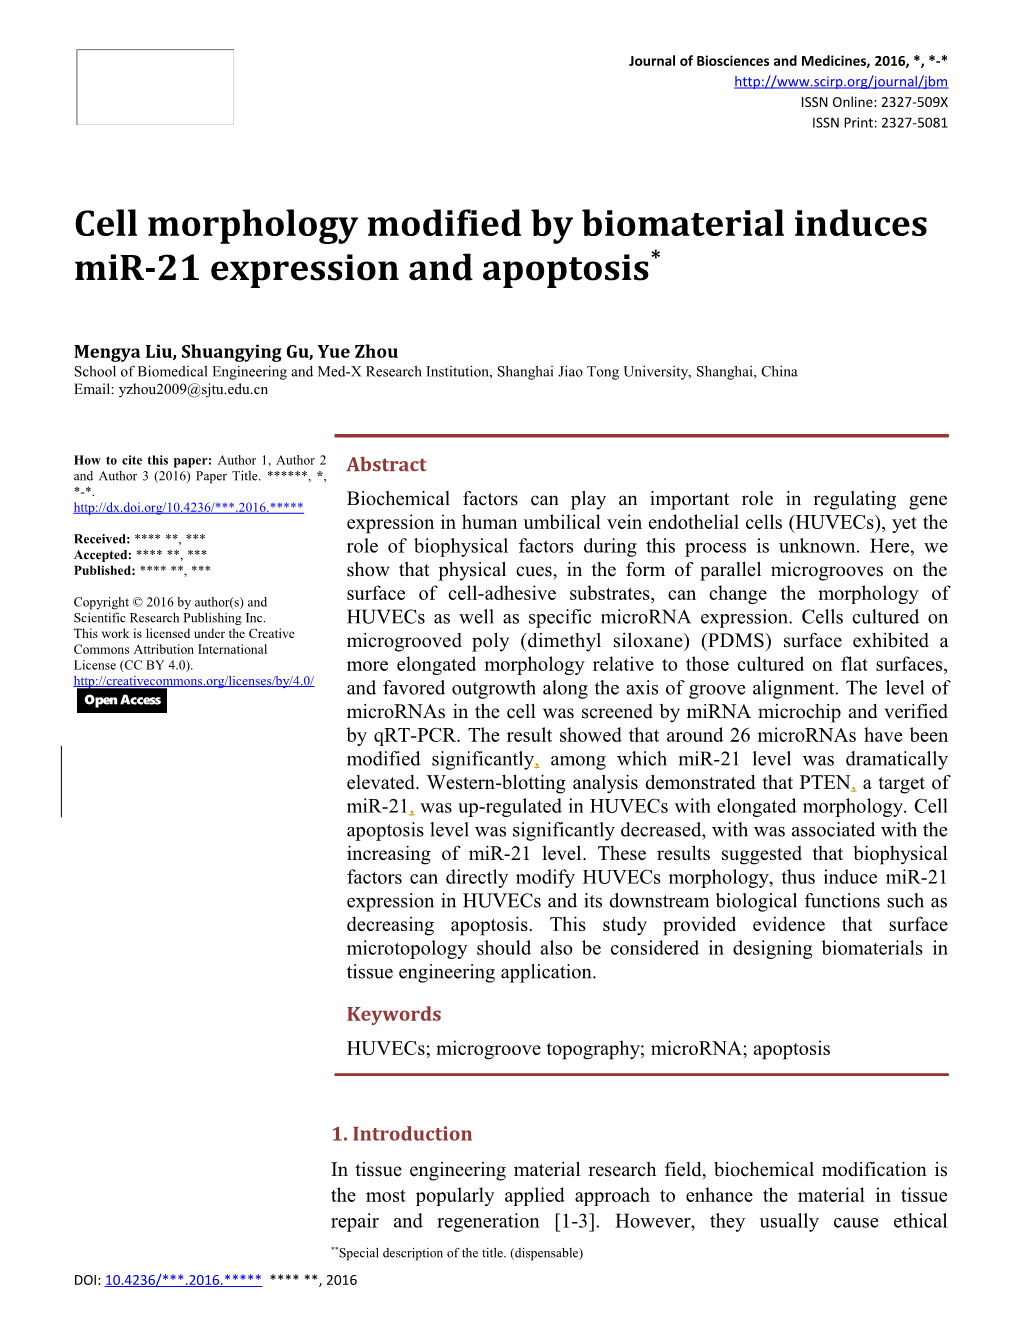 Cell Morphology Modified by Biomaterial Induces Mir-21 Expression and Apoptosis*